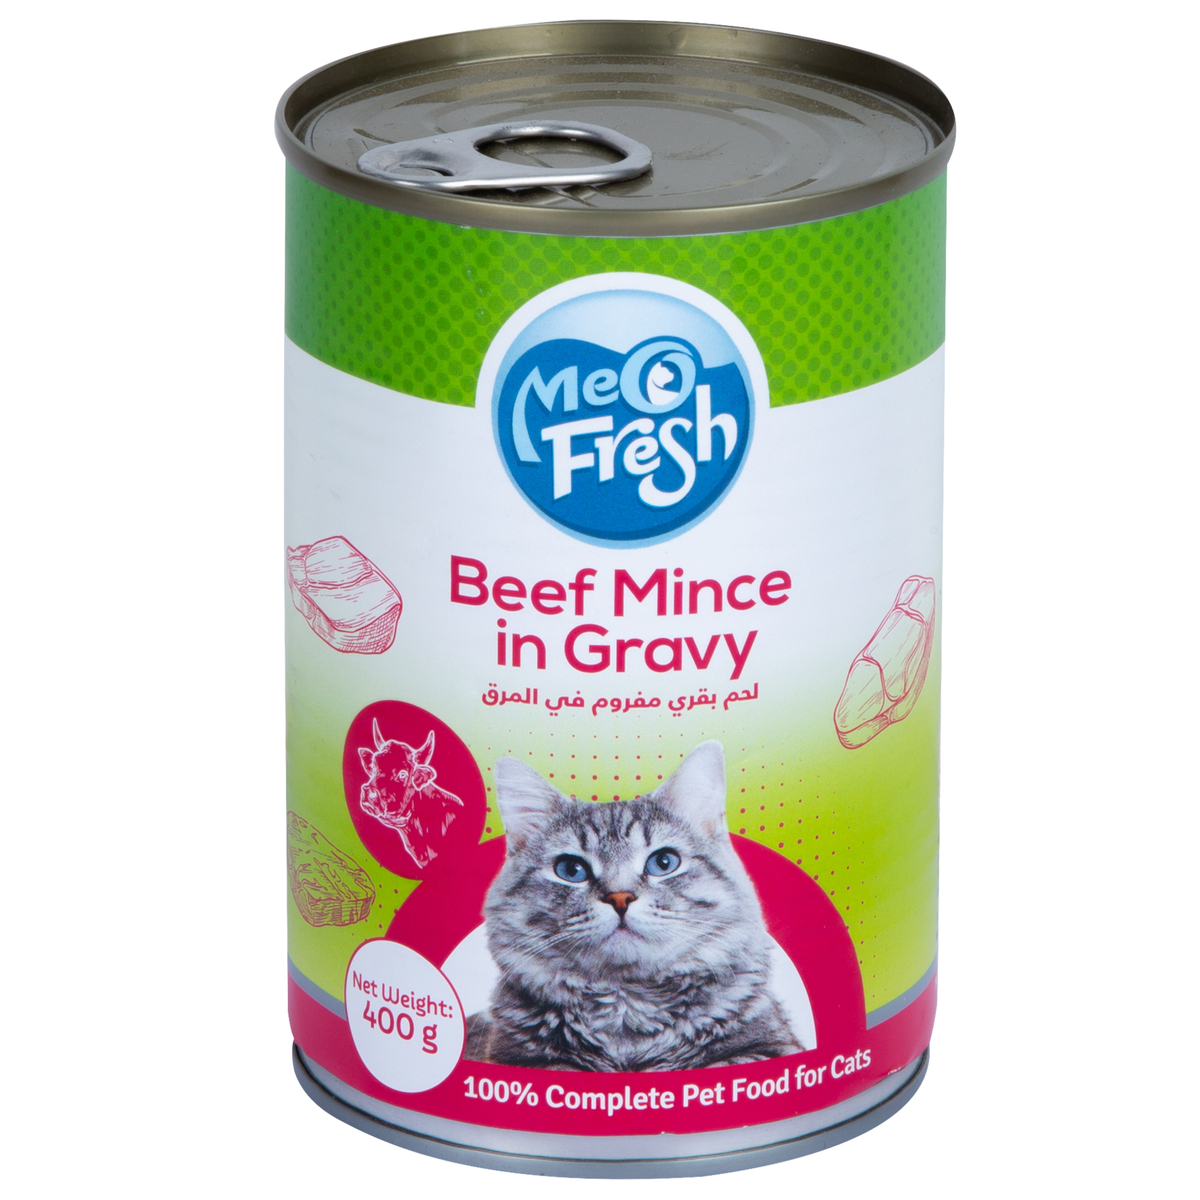 Meo Fresh Beef Mince In Gravy Catfood 400 g